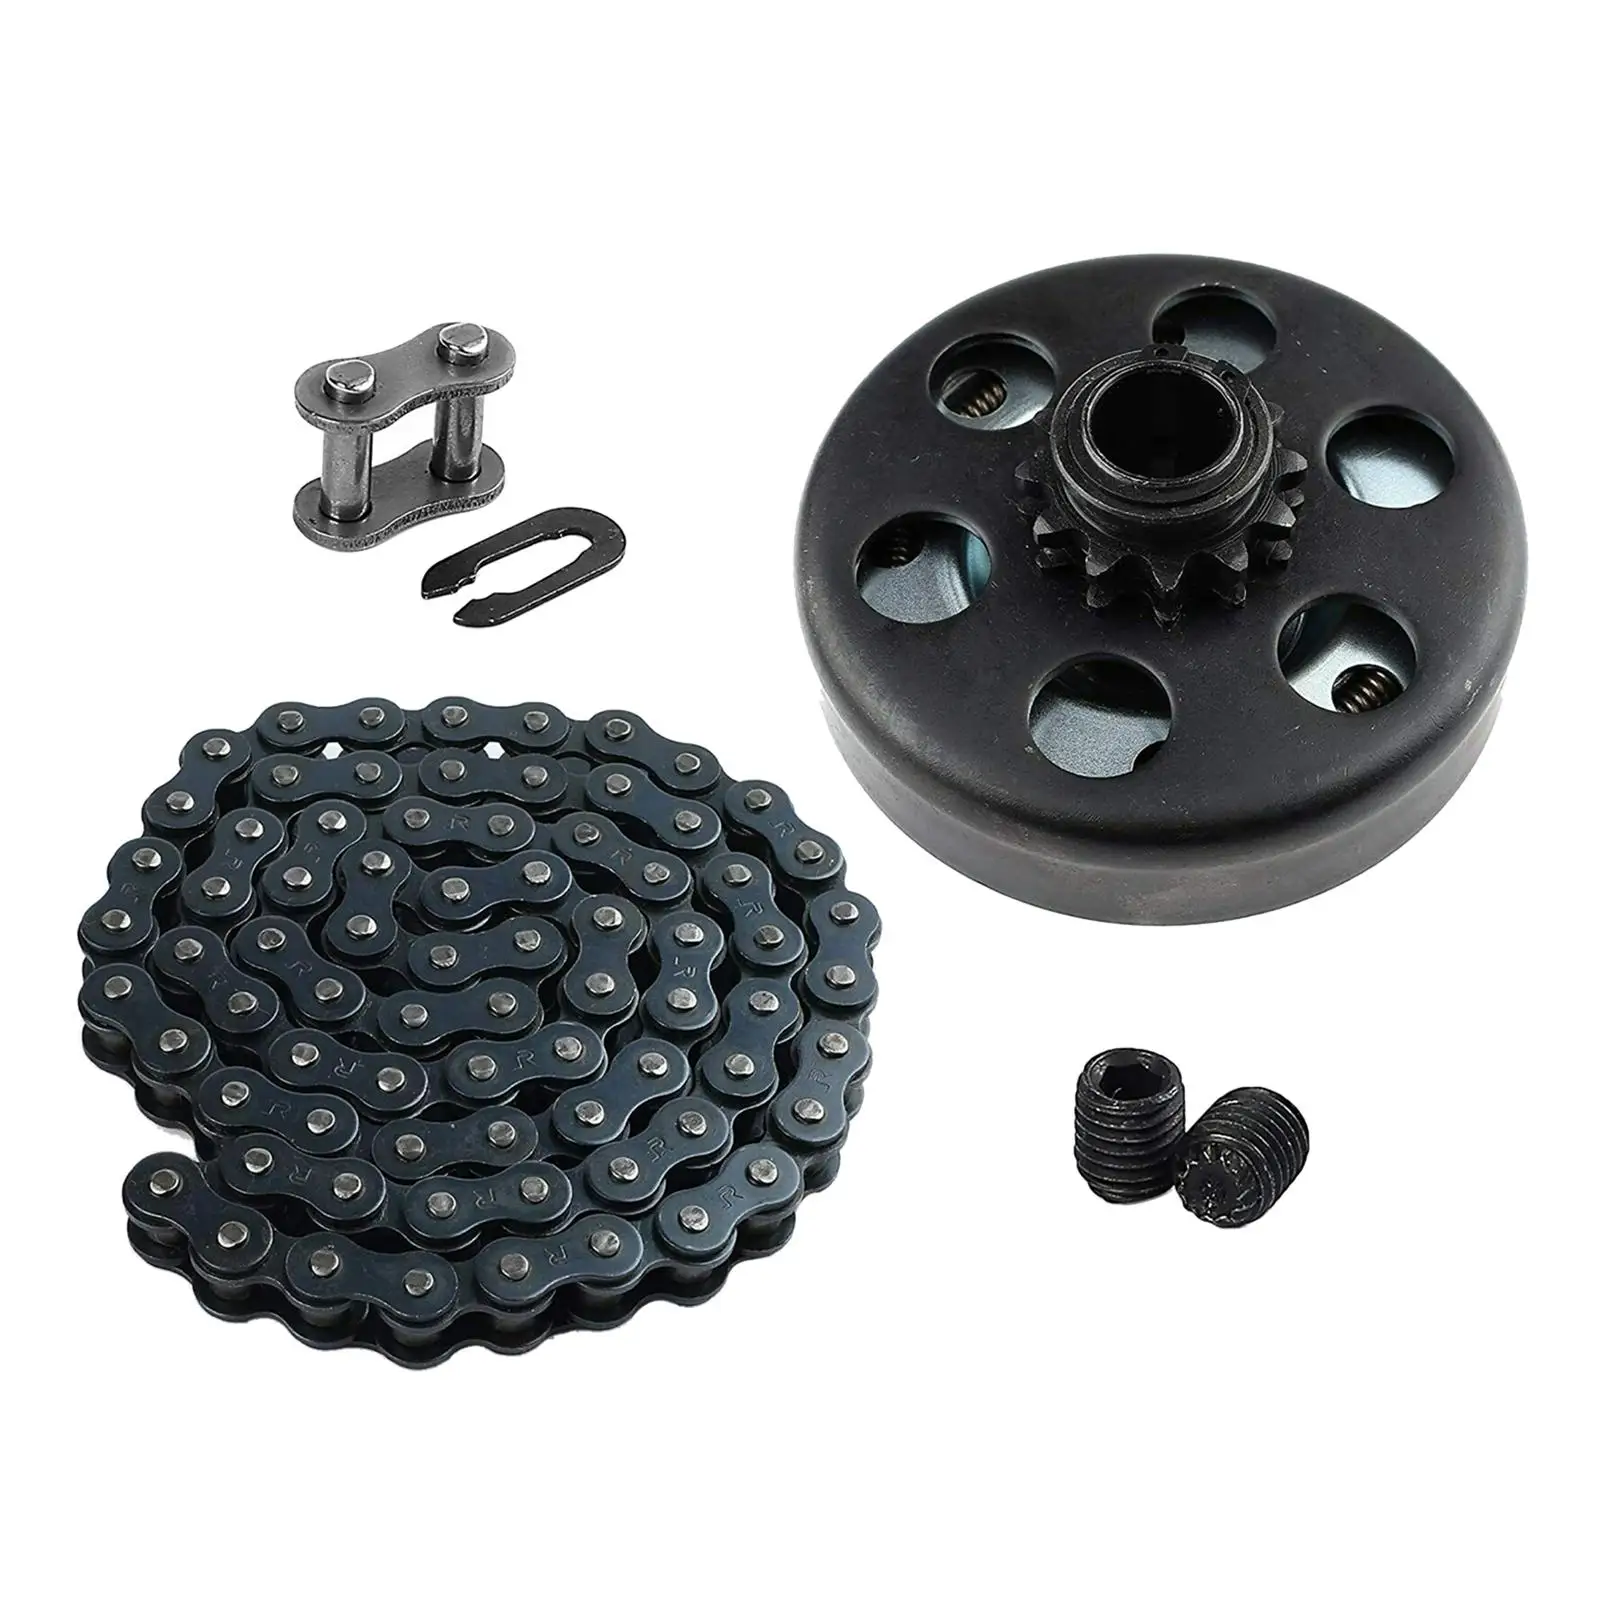 Centrifugal Clutch 12 Tooth for Mini Bike to 6.5 HP 3/4